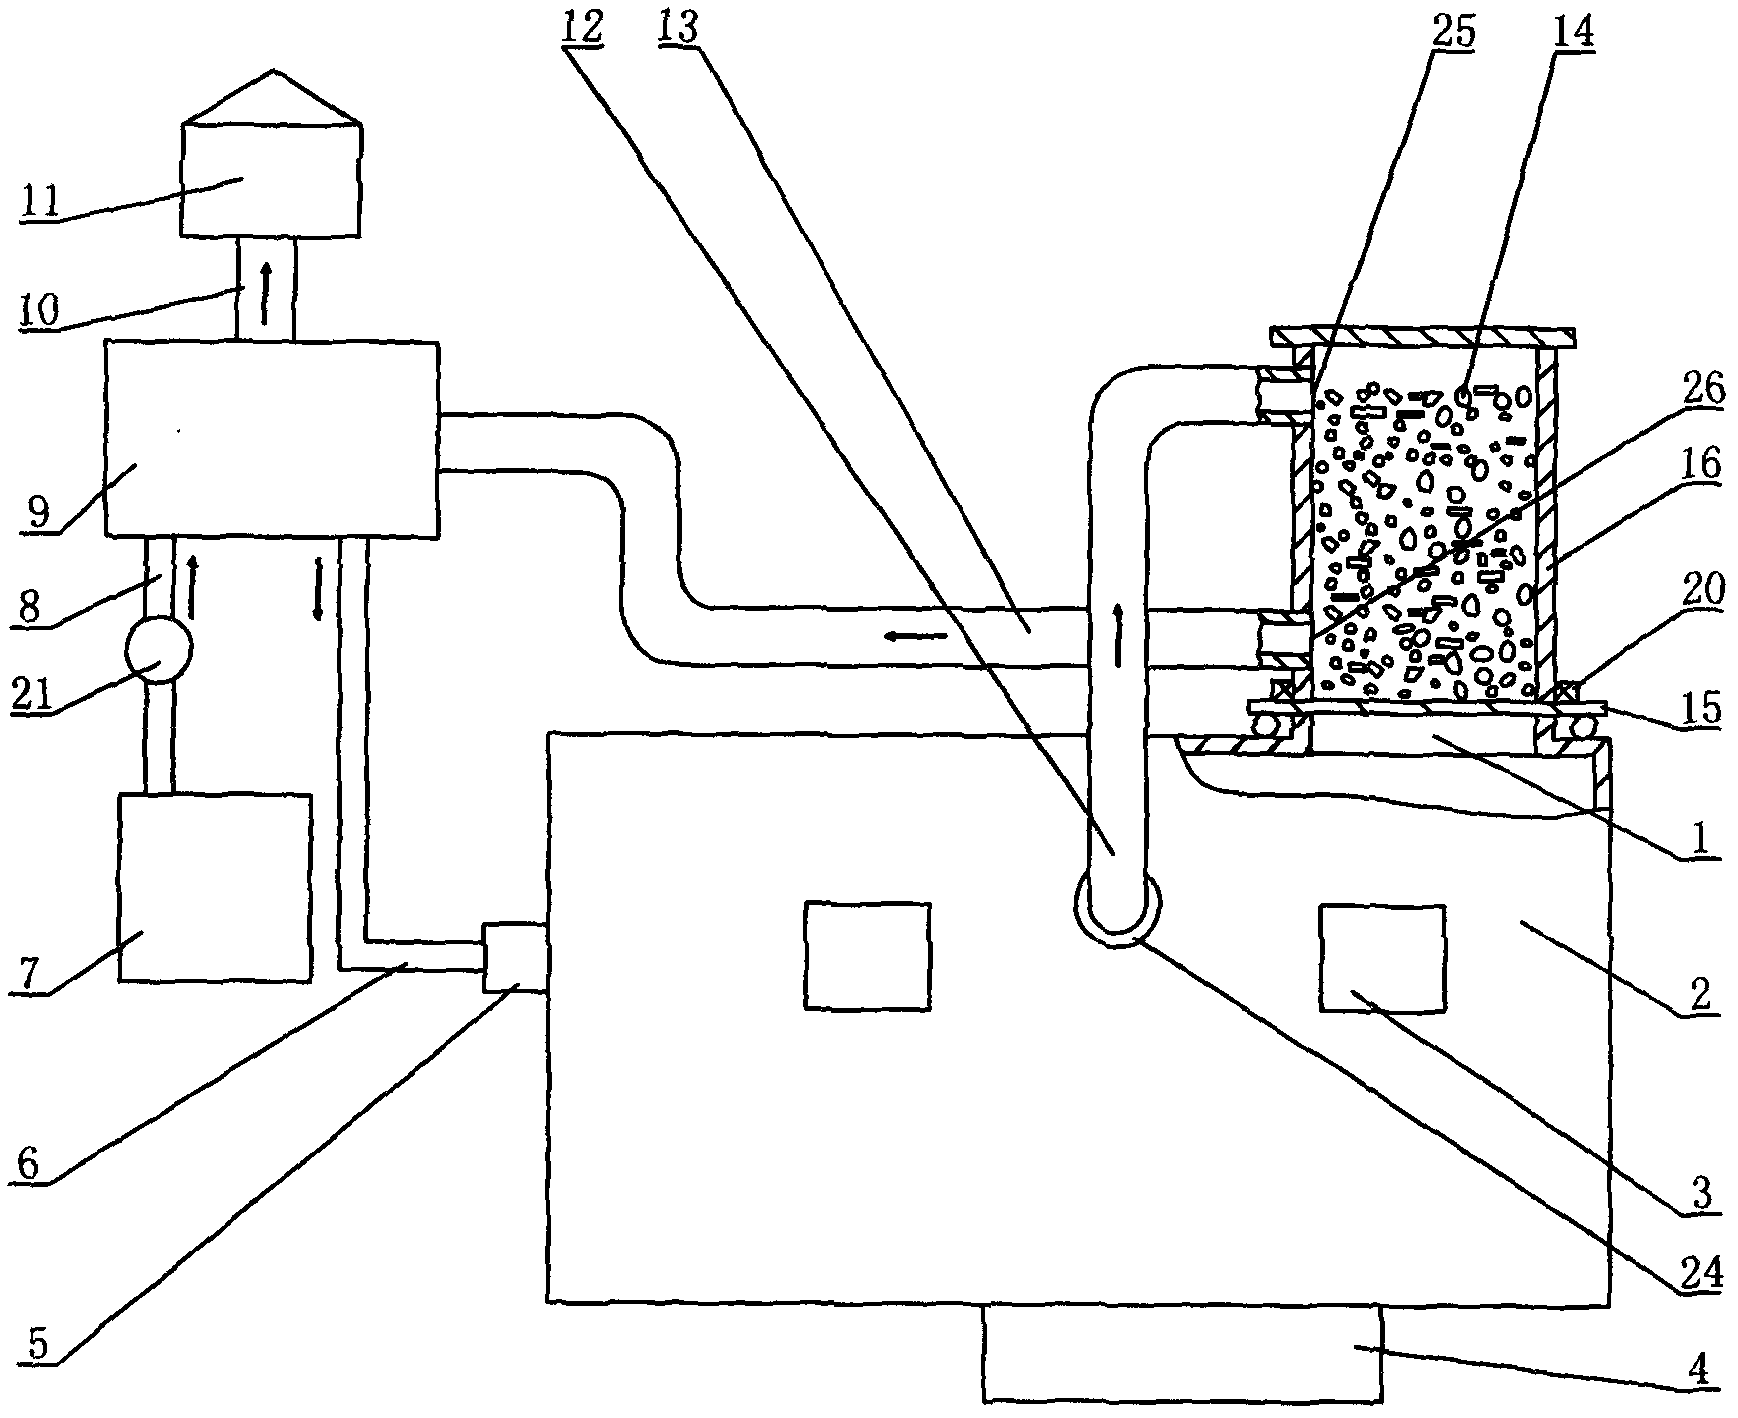 Industrial furnace for non-ferrous metal smelting